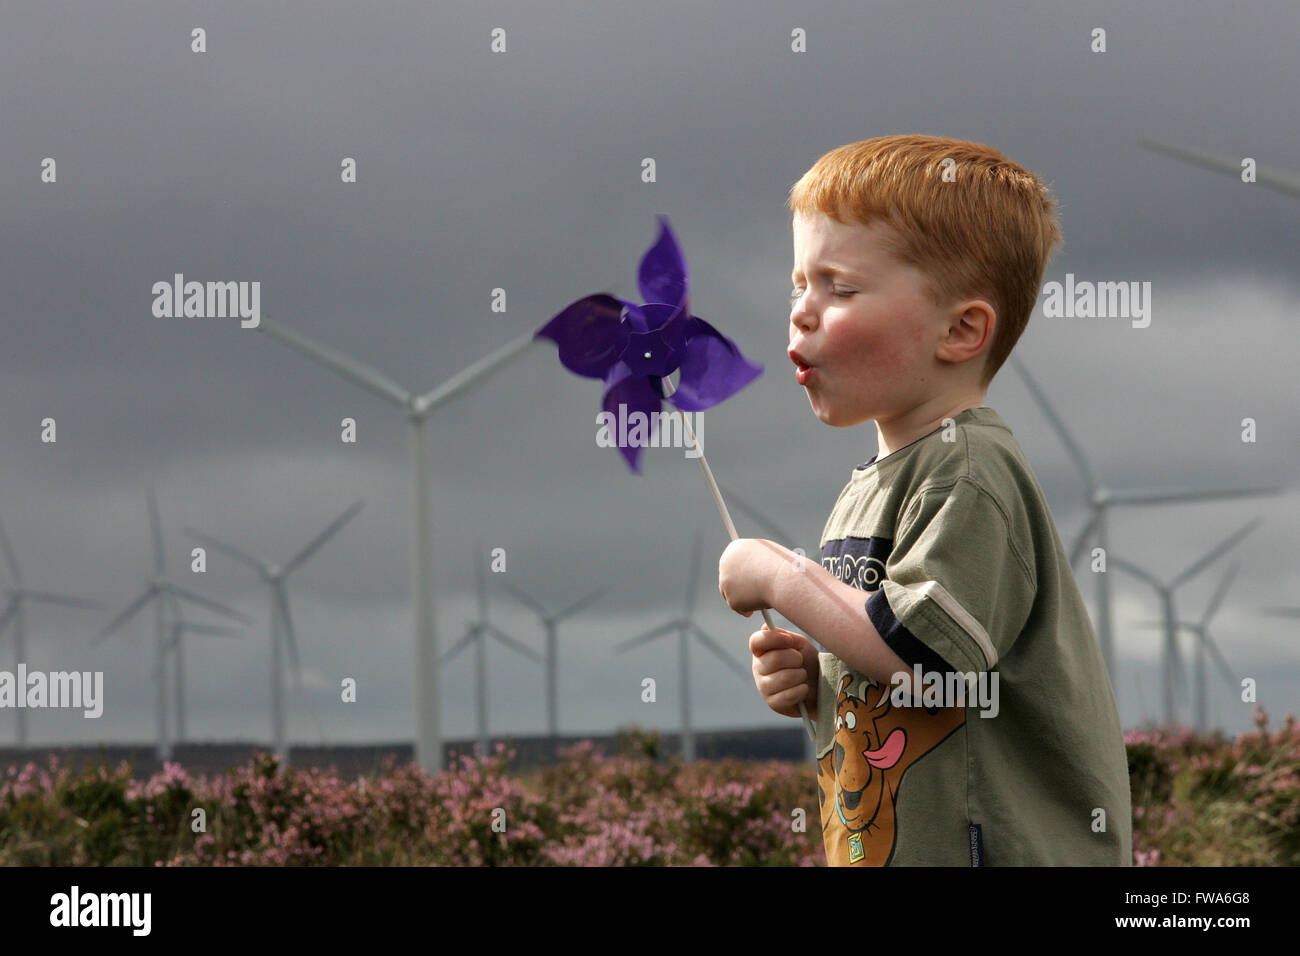 young boy playing with windmill on wind farm Stock Photo